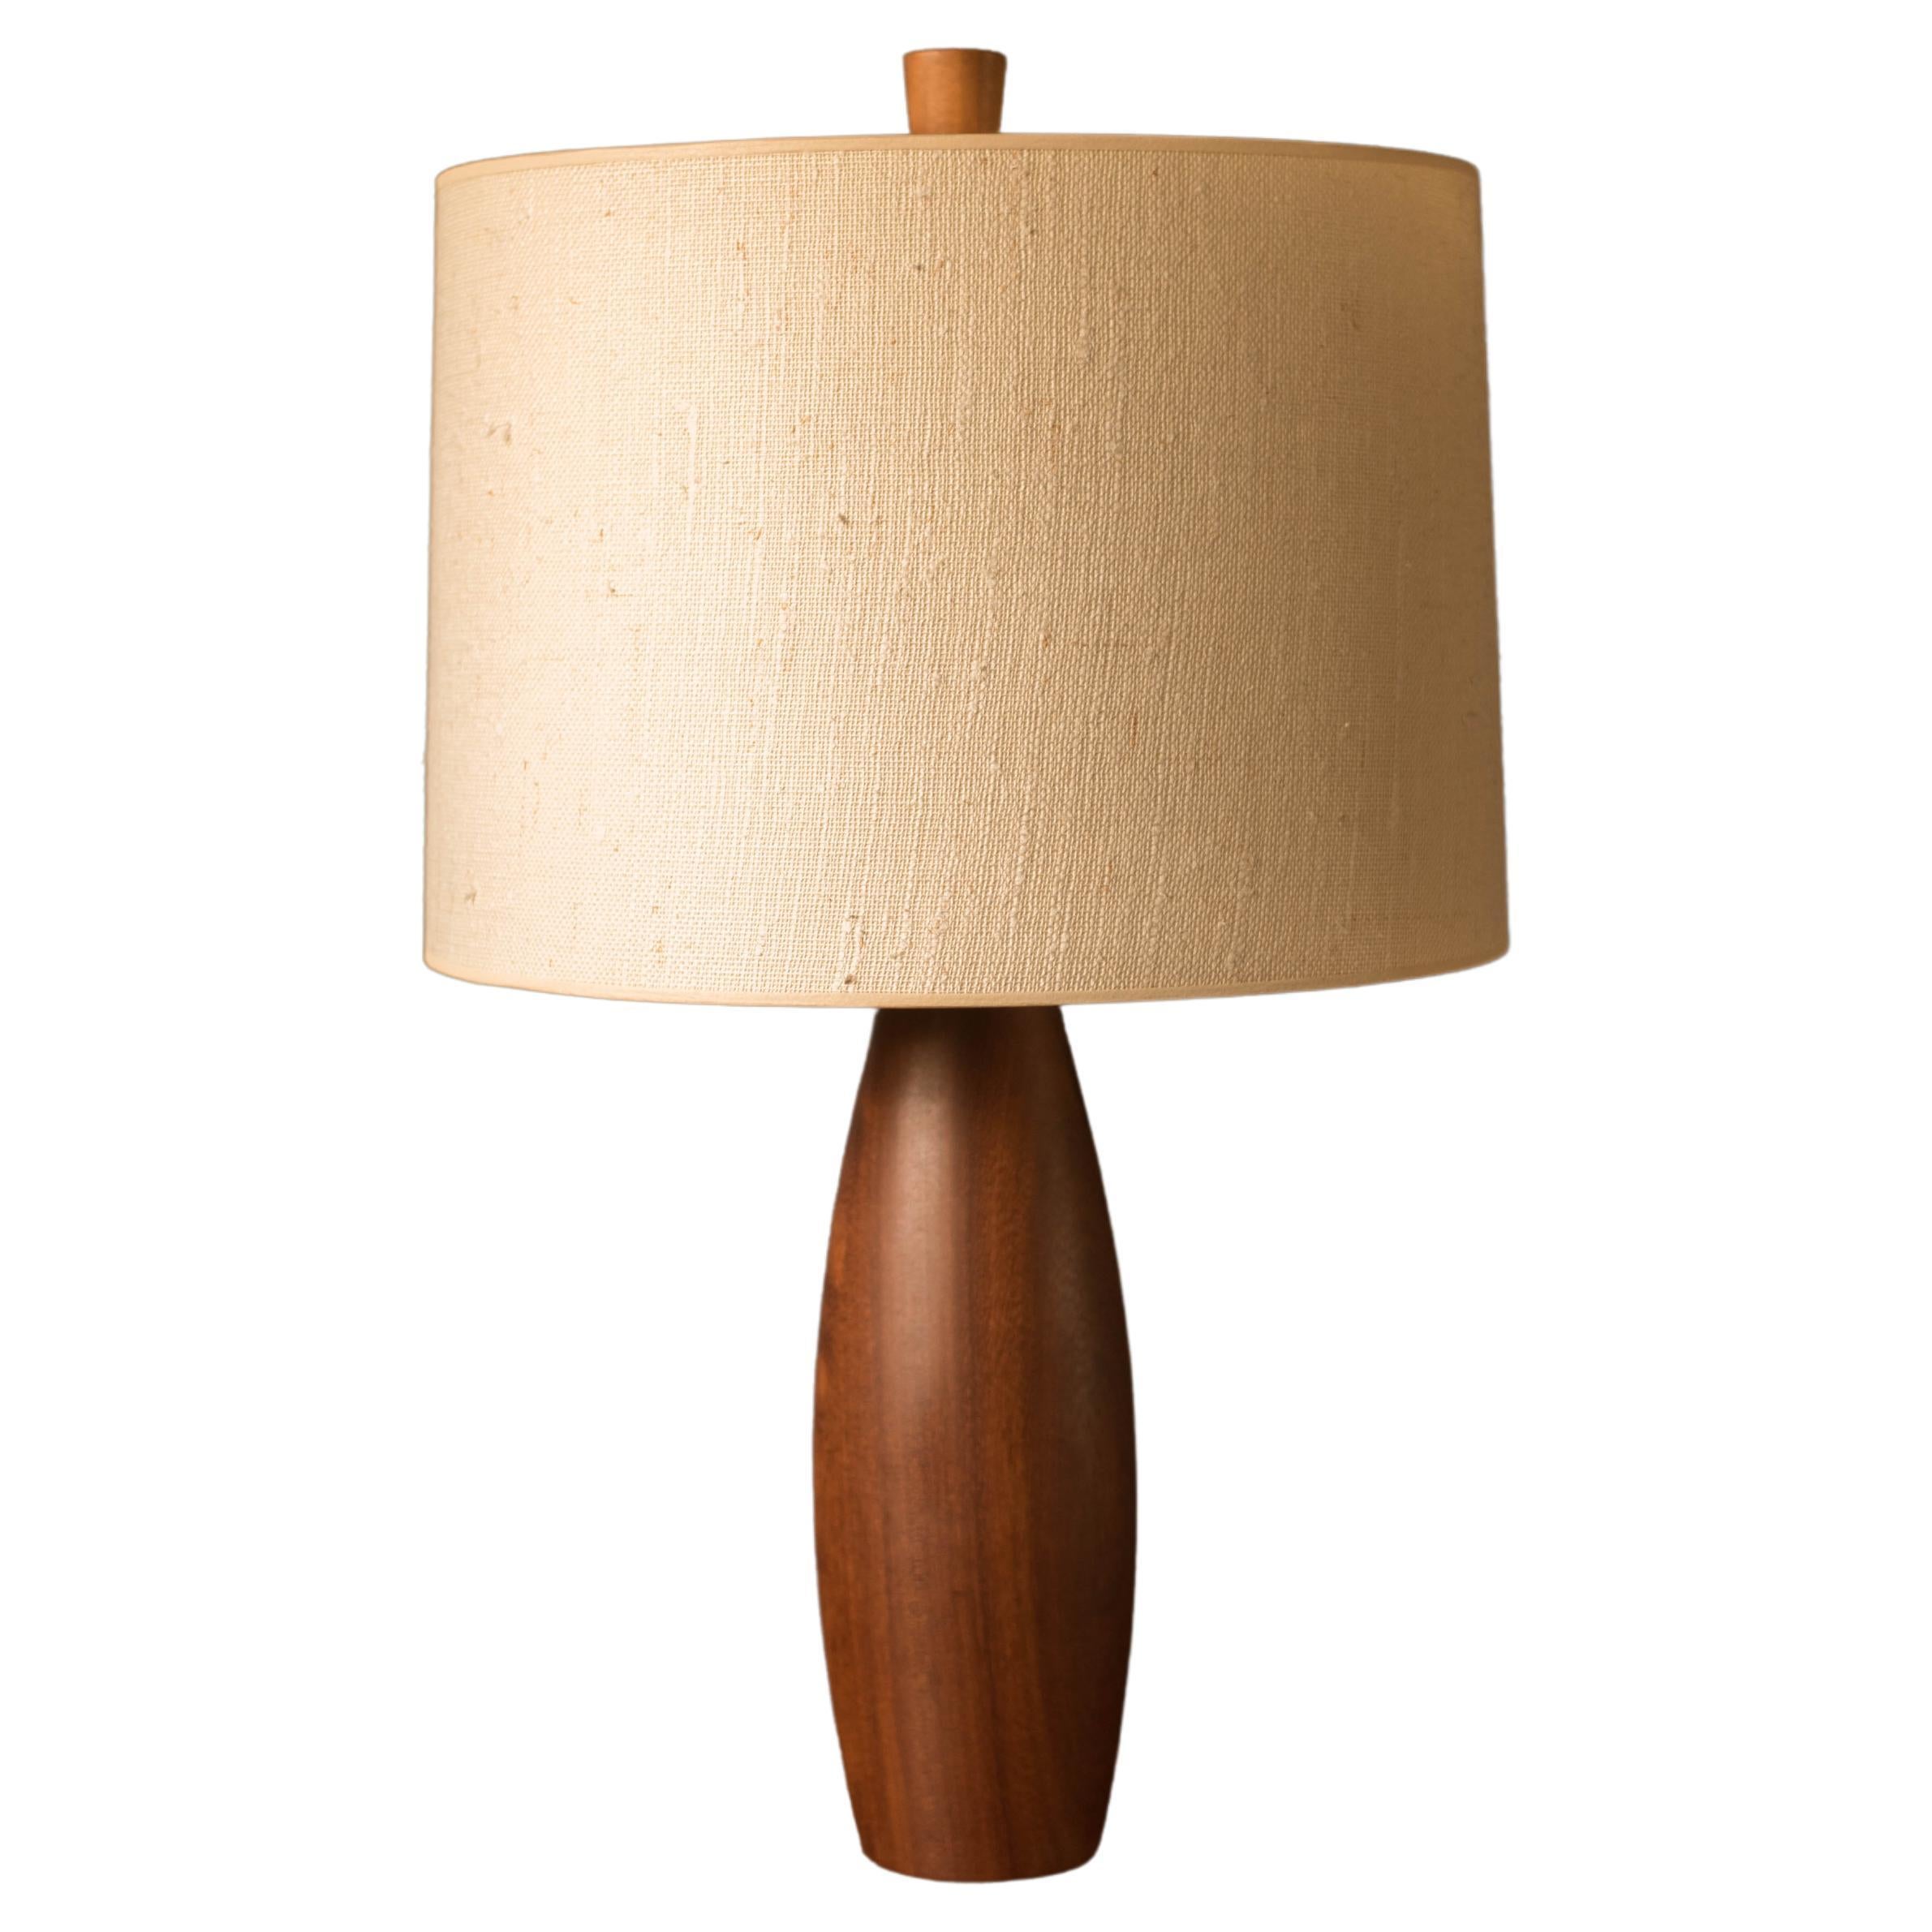 Sculptural Turned Solid Teak Mid Century Modern Accent Table Lamp